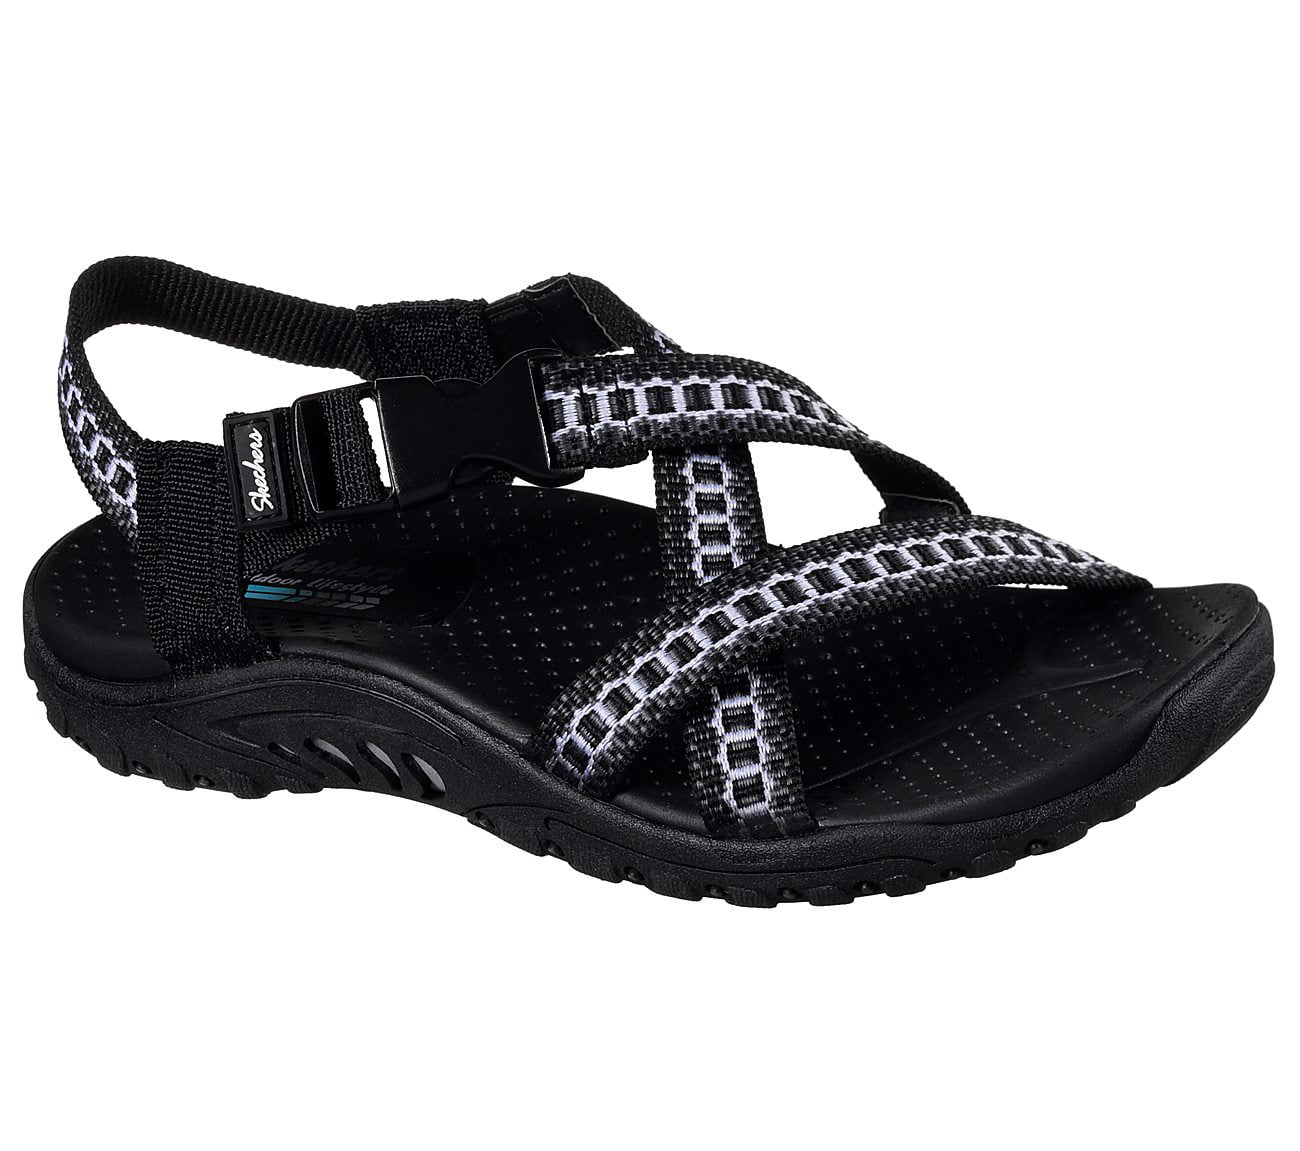 sandals by sketchers